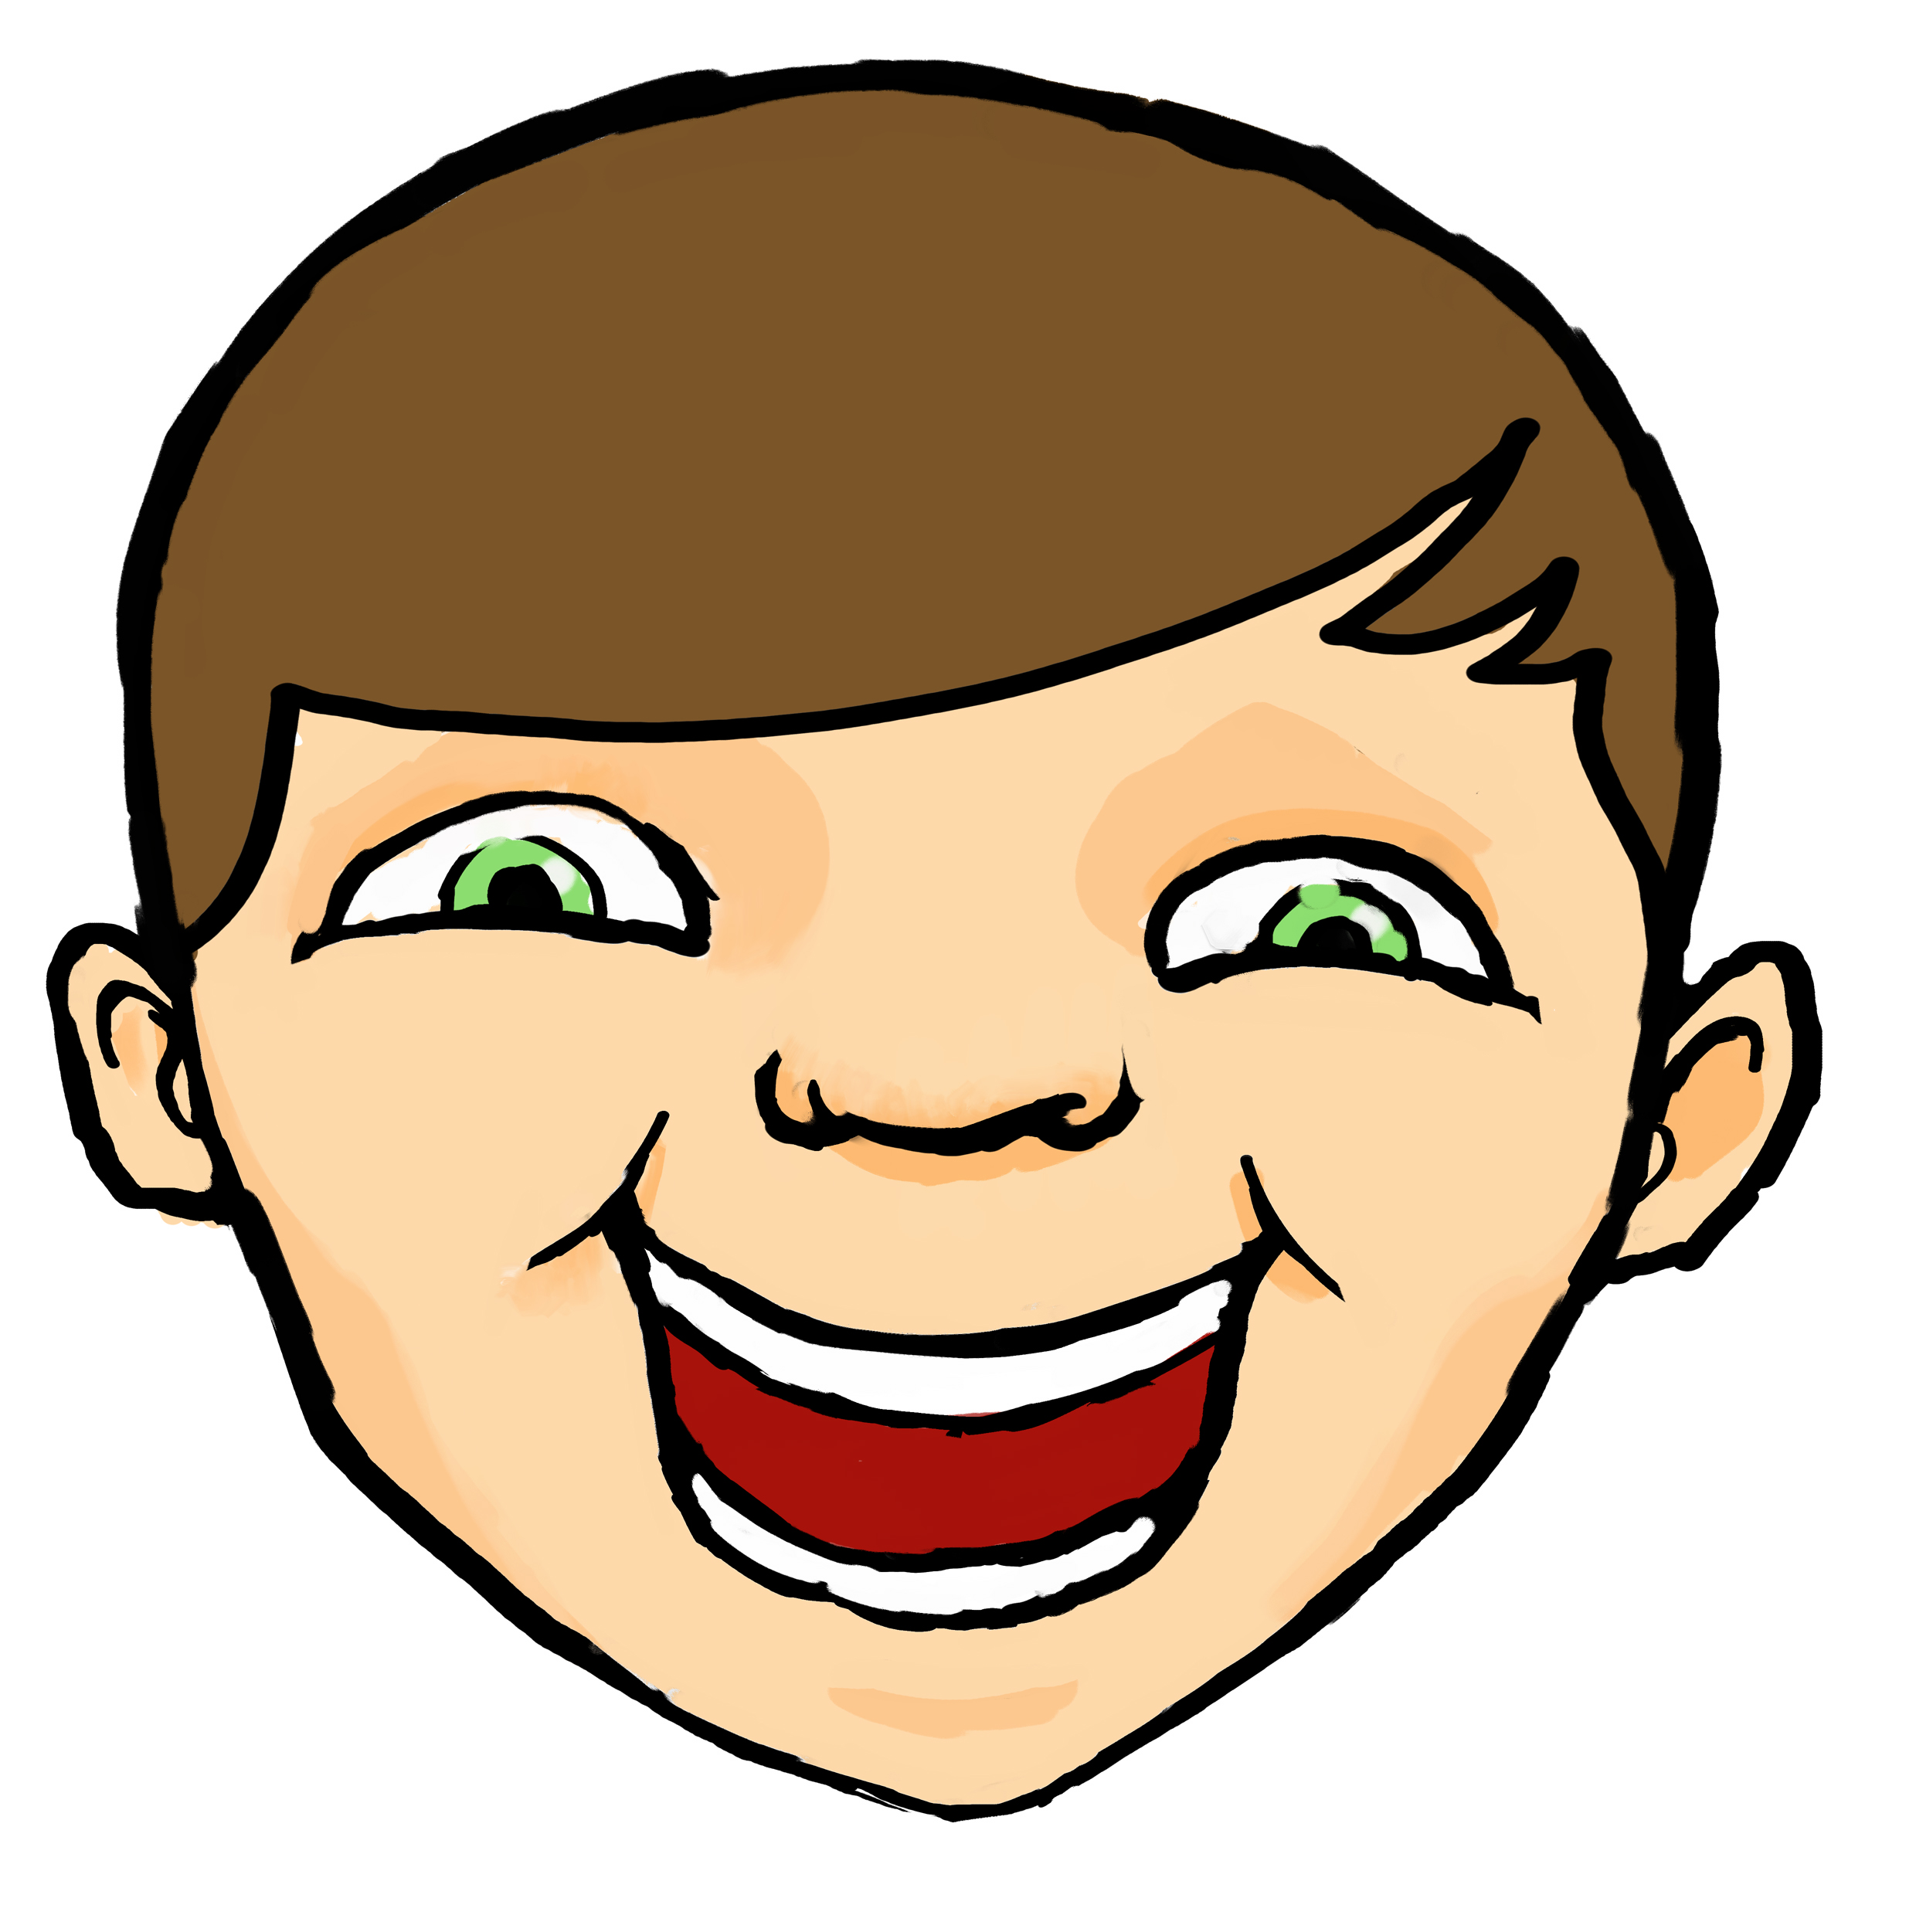 Laughing Cartoon Image - ClipArt Best